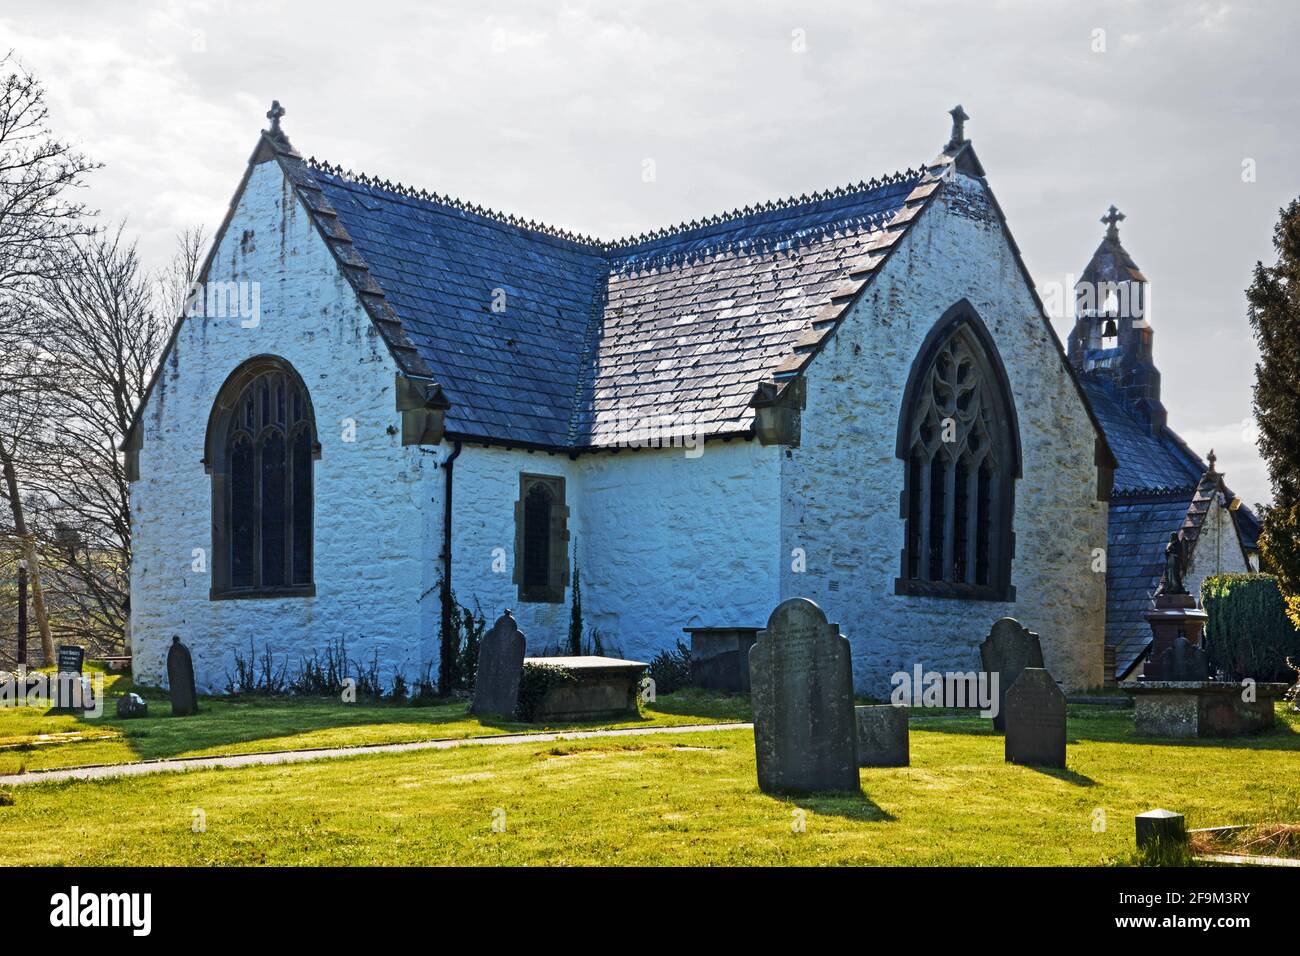 St Digain’s Church in Llangernyw, North Wales, has a nave thought to be late medieval or Tudor but much of it was rebuilt in the 19th century. Stock Photo